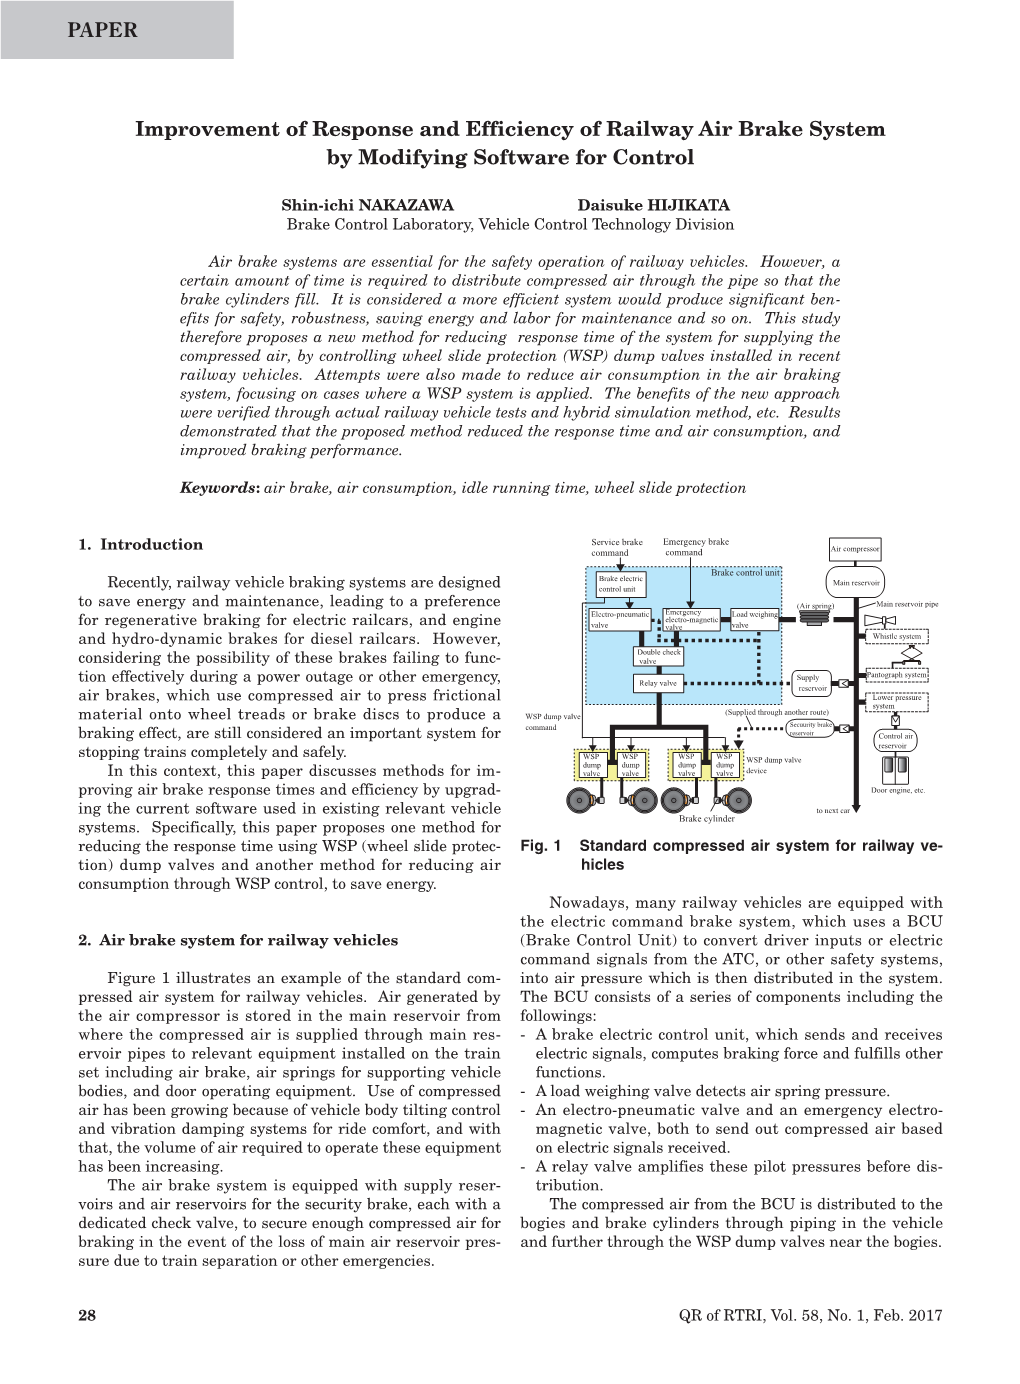 Improvement of Response and Efficiency of Railway Air Brake System by Modifying Software for Control